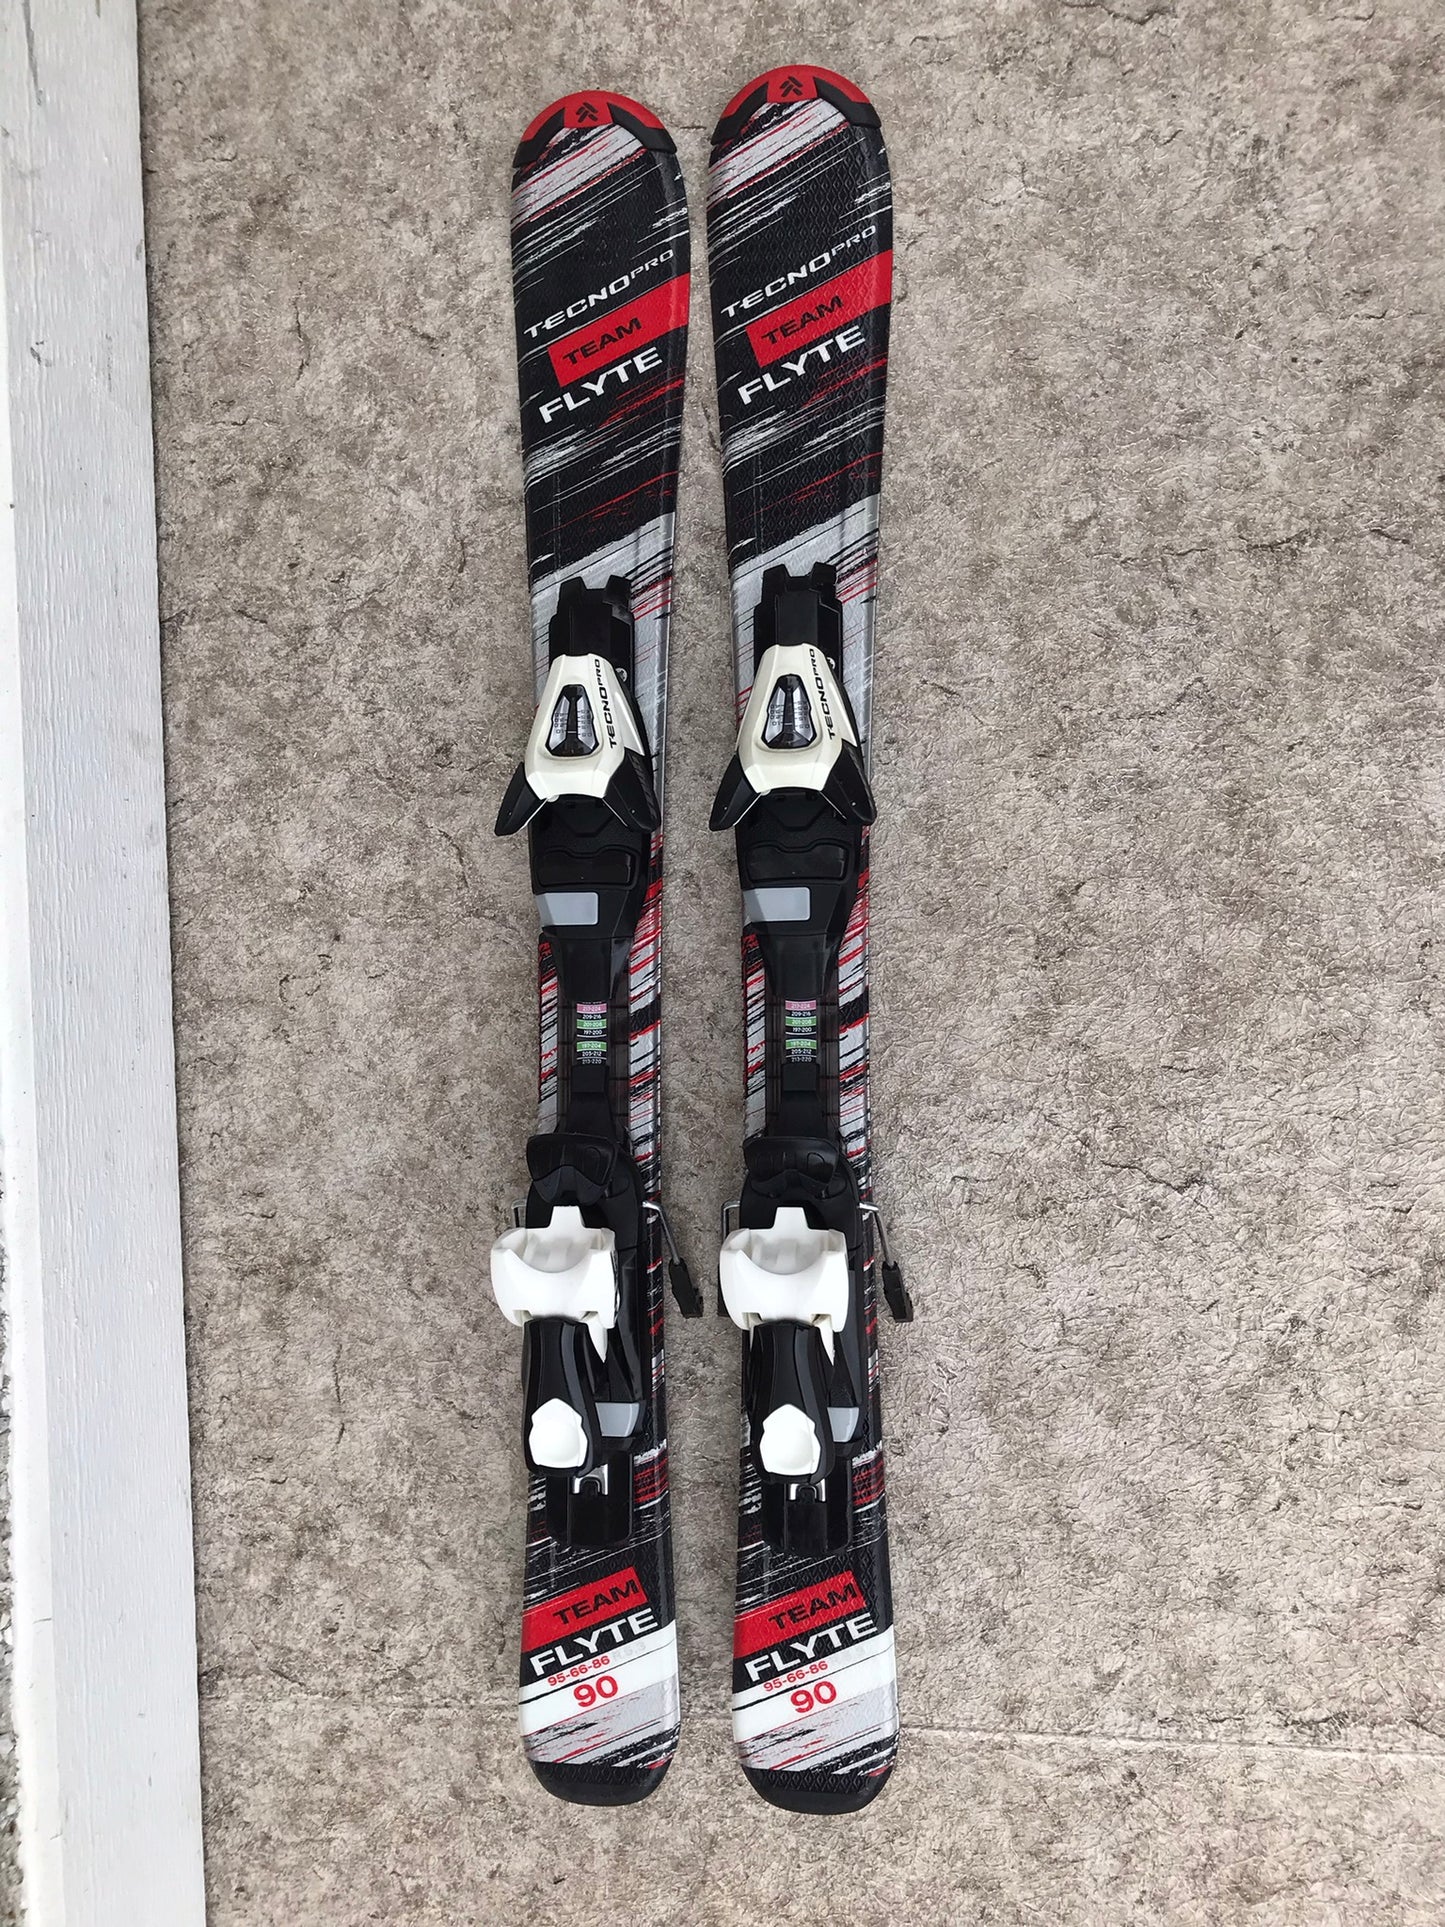 Ski 090 Tecno Pro Flyte Parabolic Black White Red With Bindings Excellent